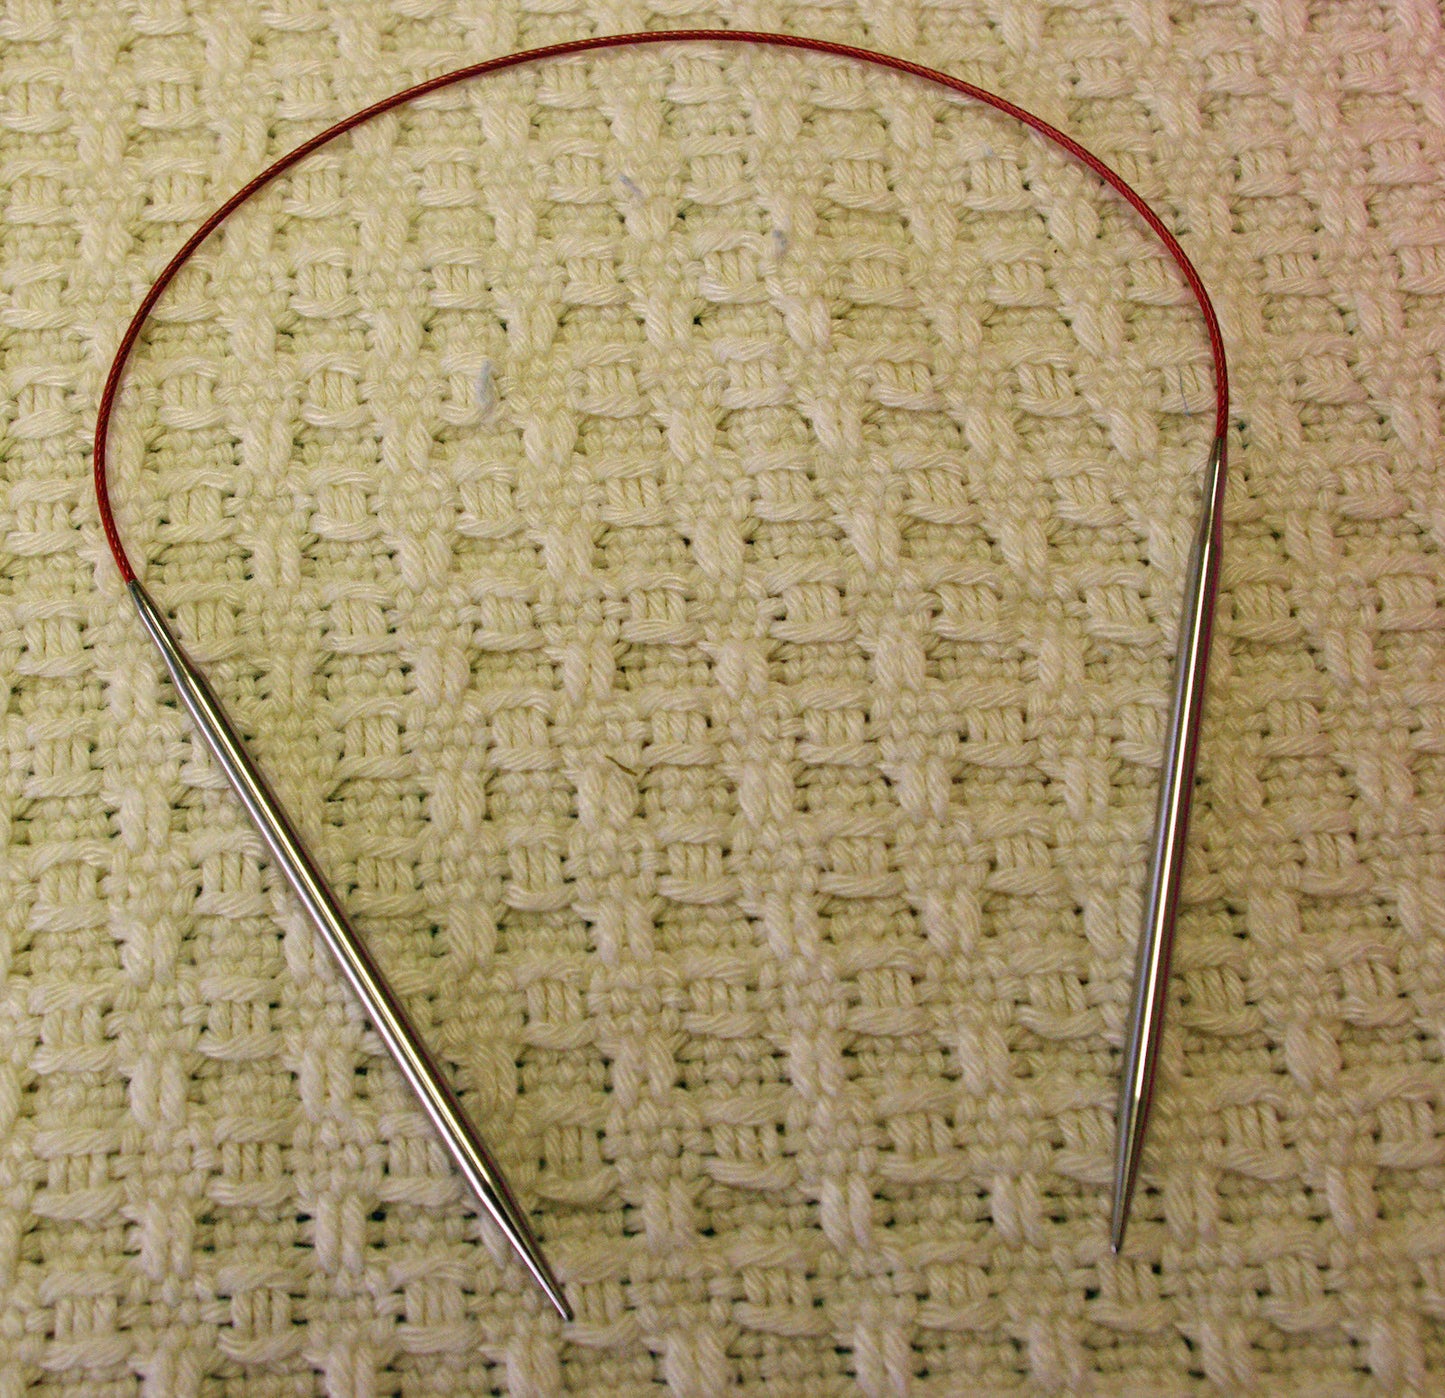 ChiaoGoo Stainless Steel 24" Red Lace Circular Knitting Needles